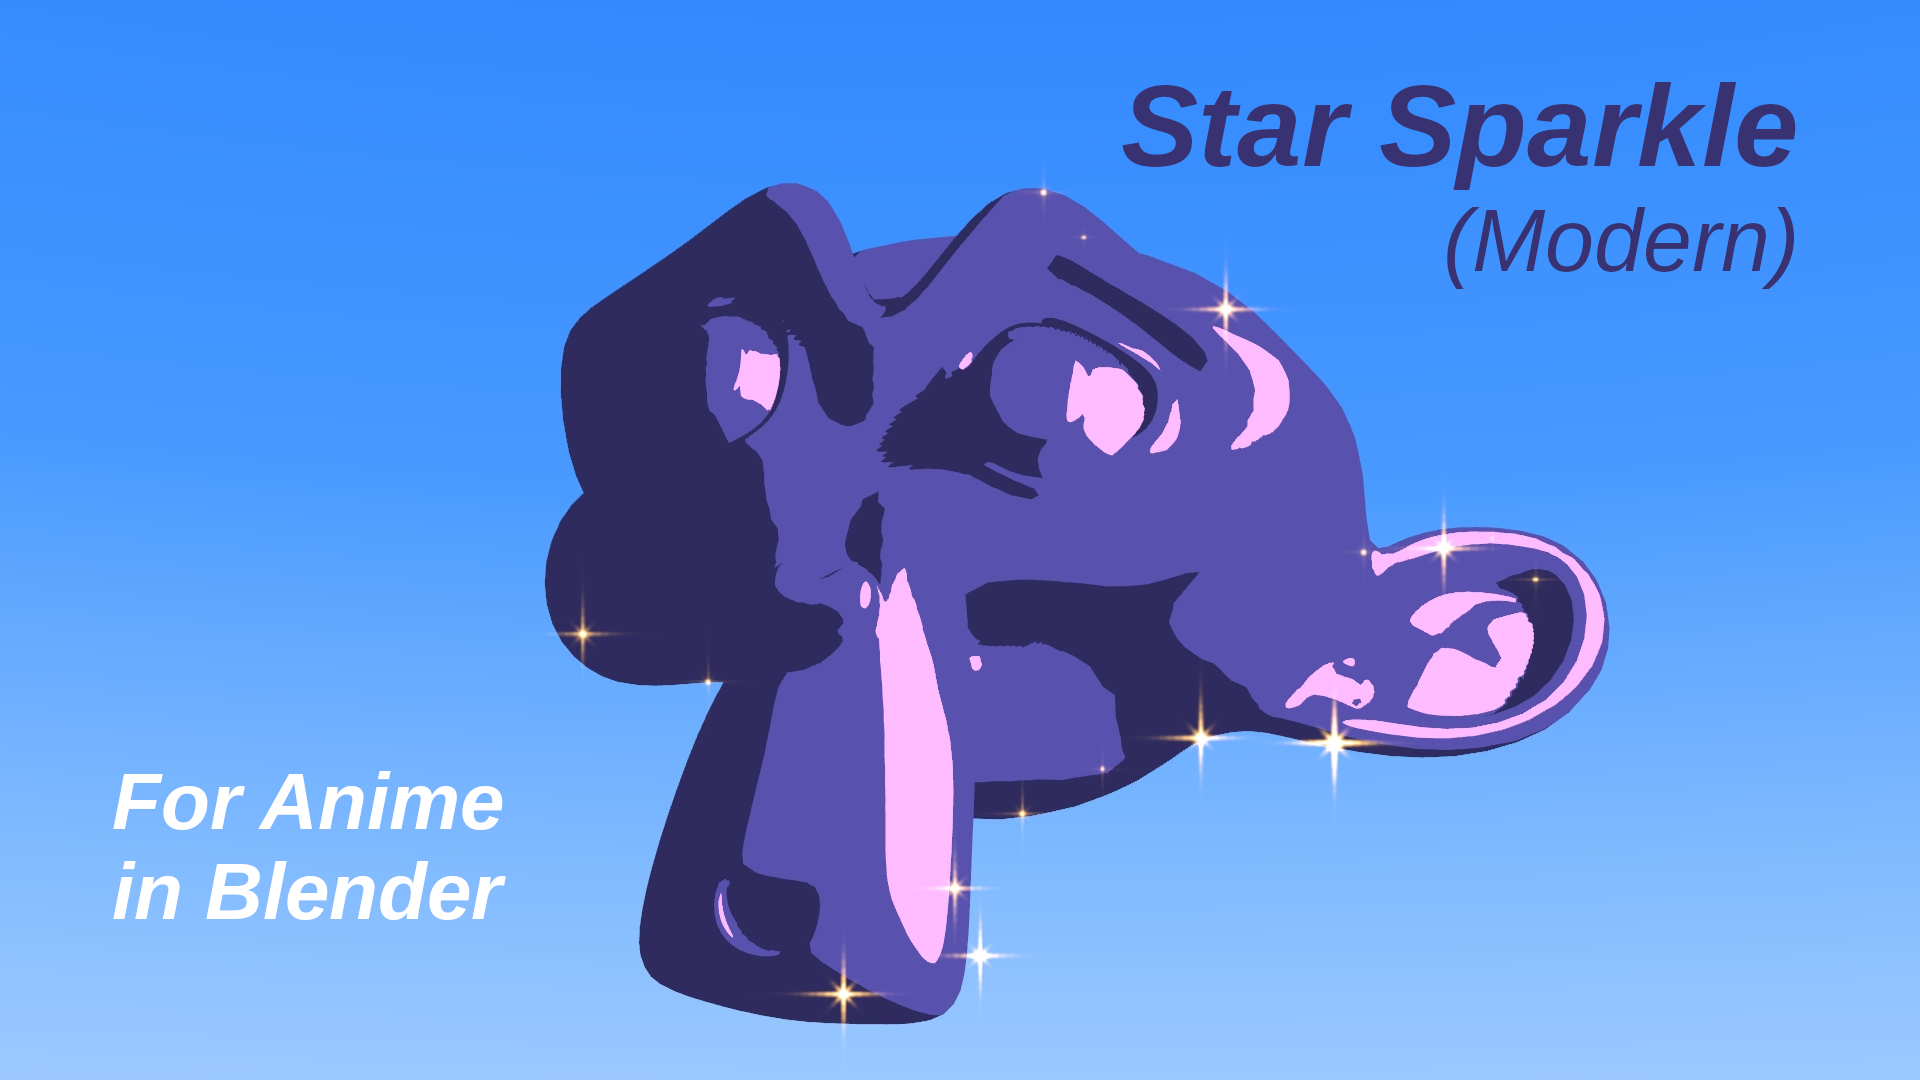 For Anime - Star Sparkle (Modern) preview image 1